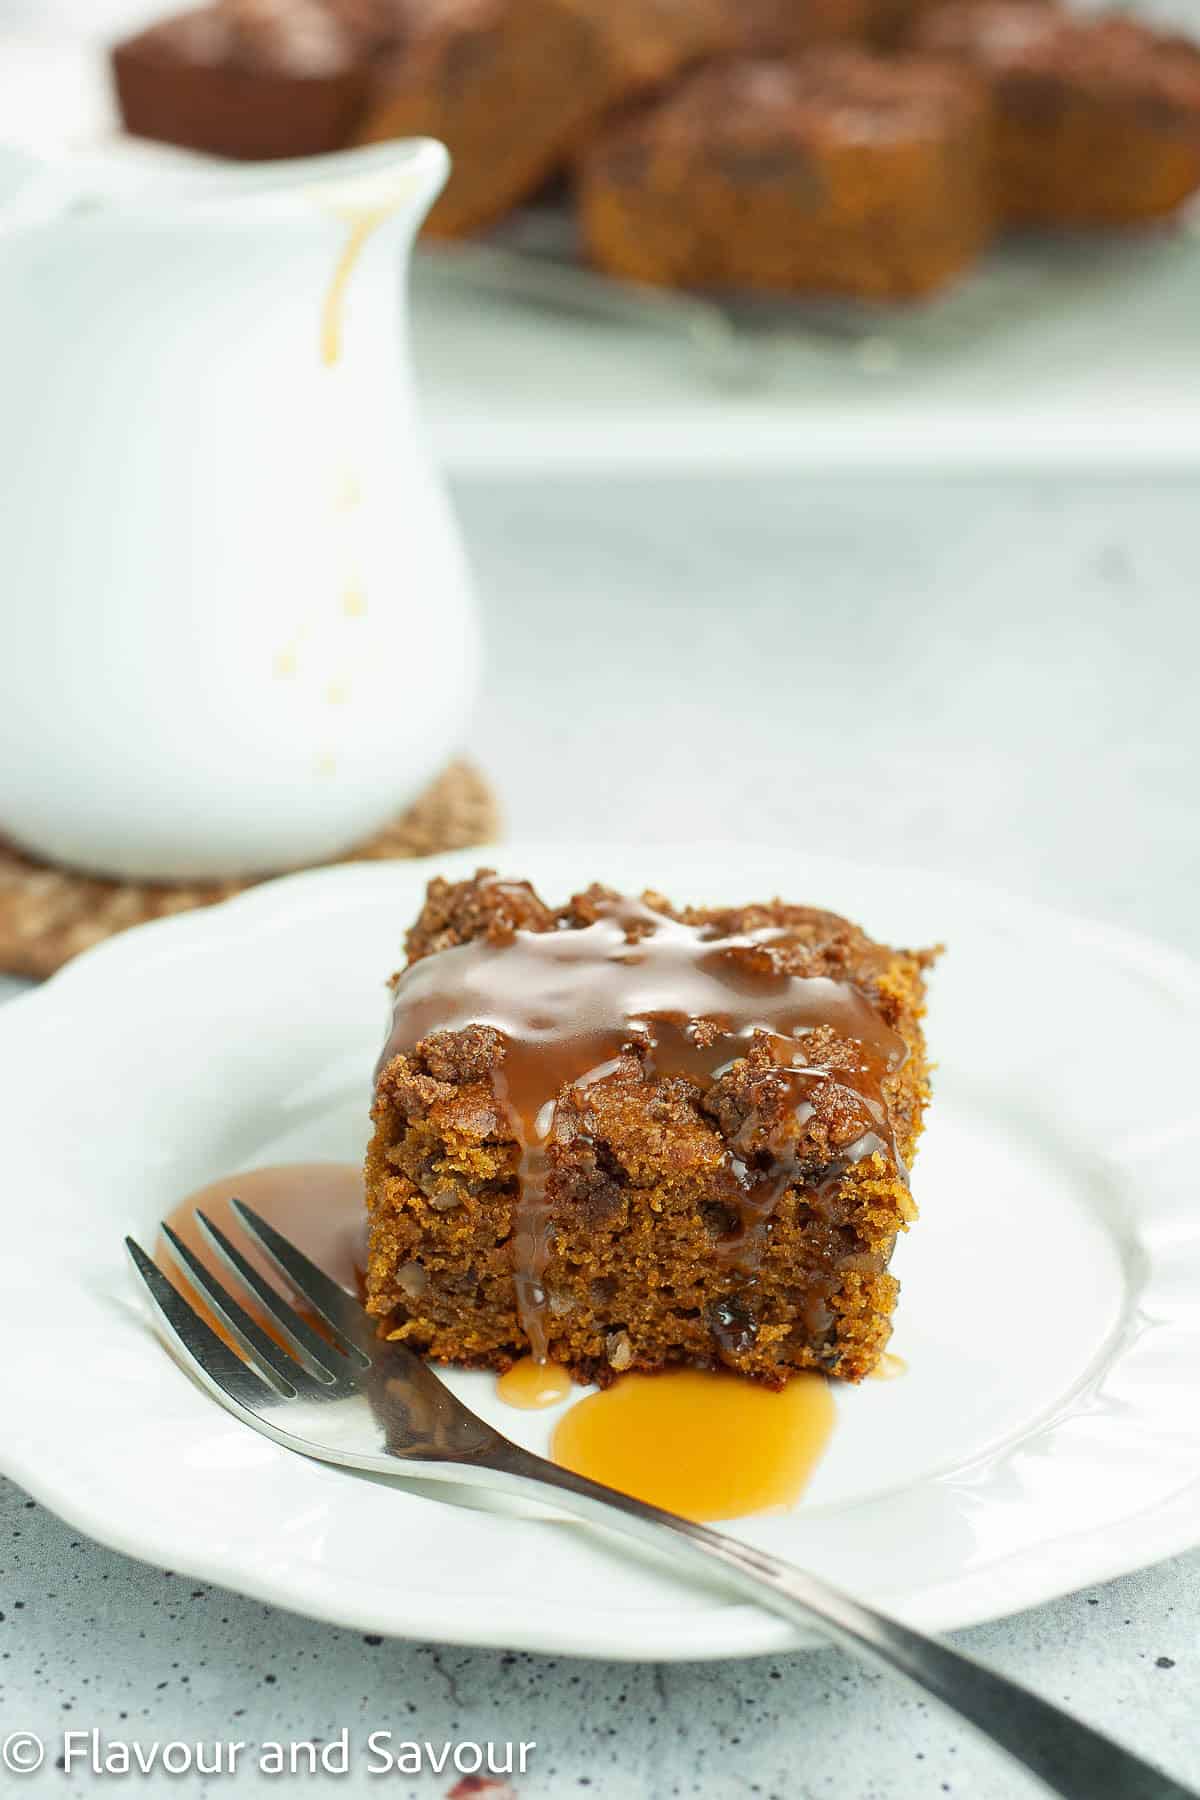 A slice of pumpkin pecan coffee cake with caramel sauce on a plate.